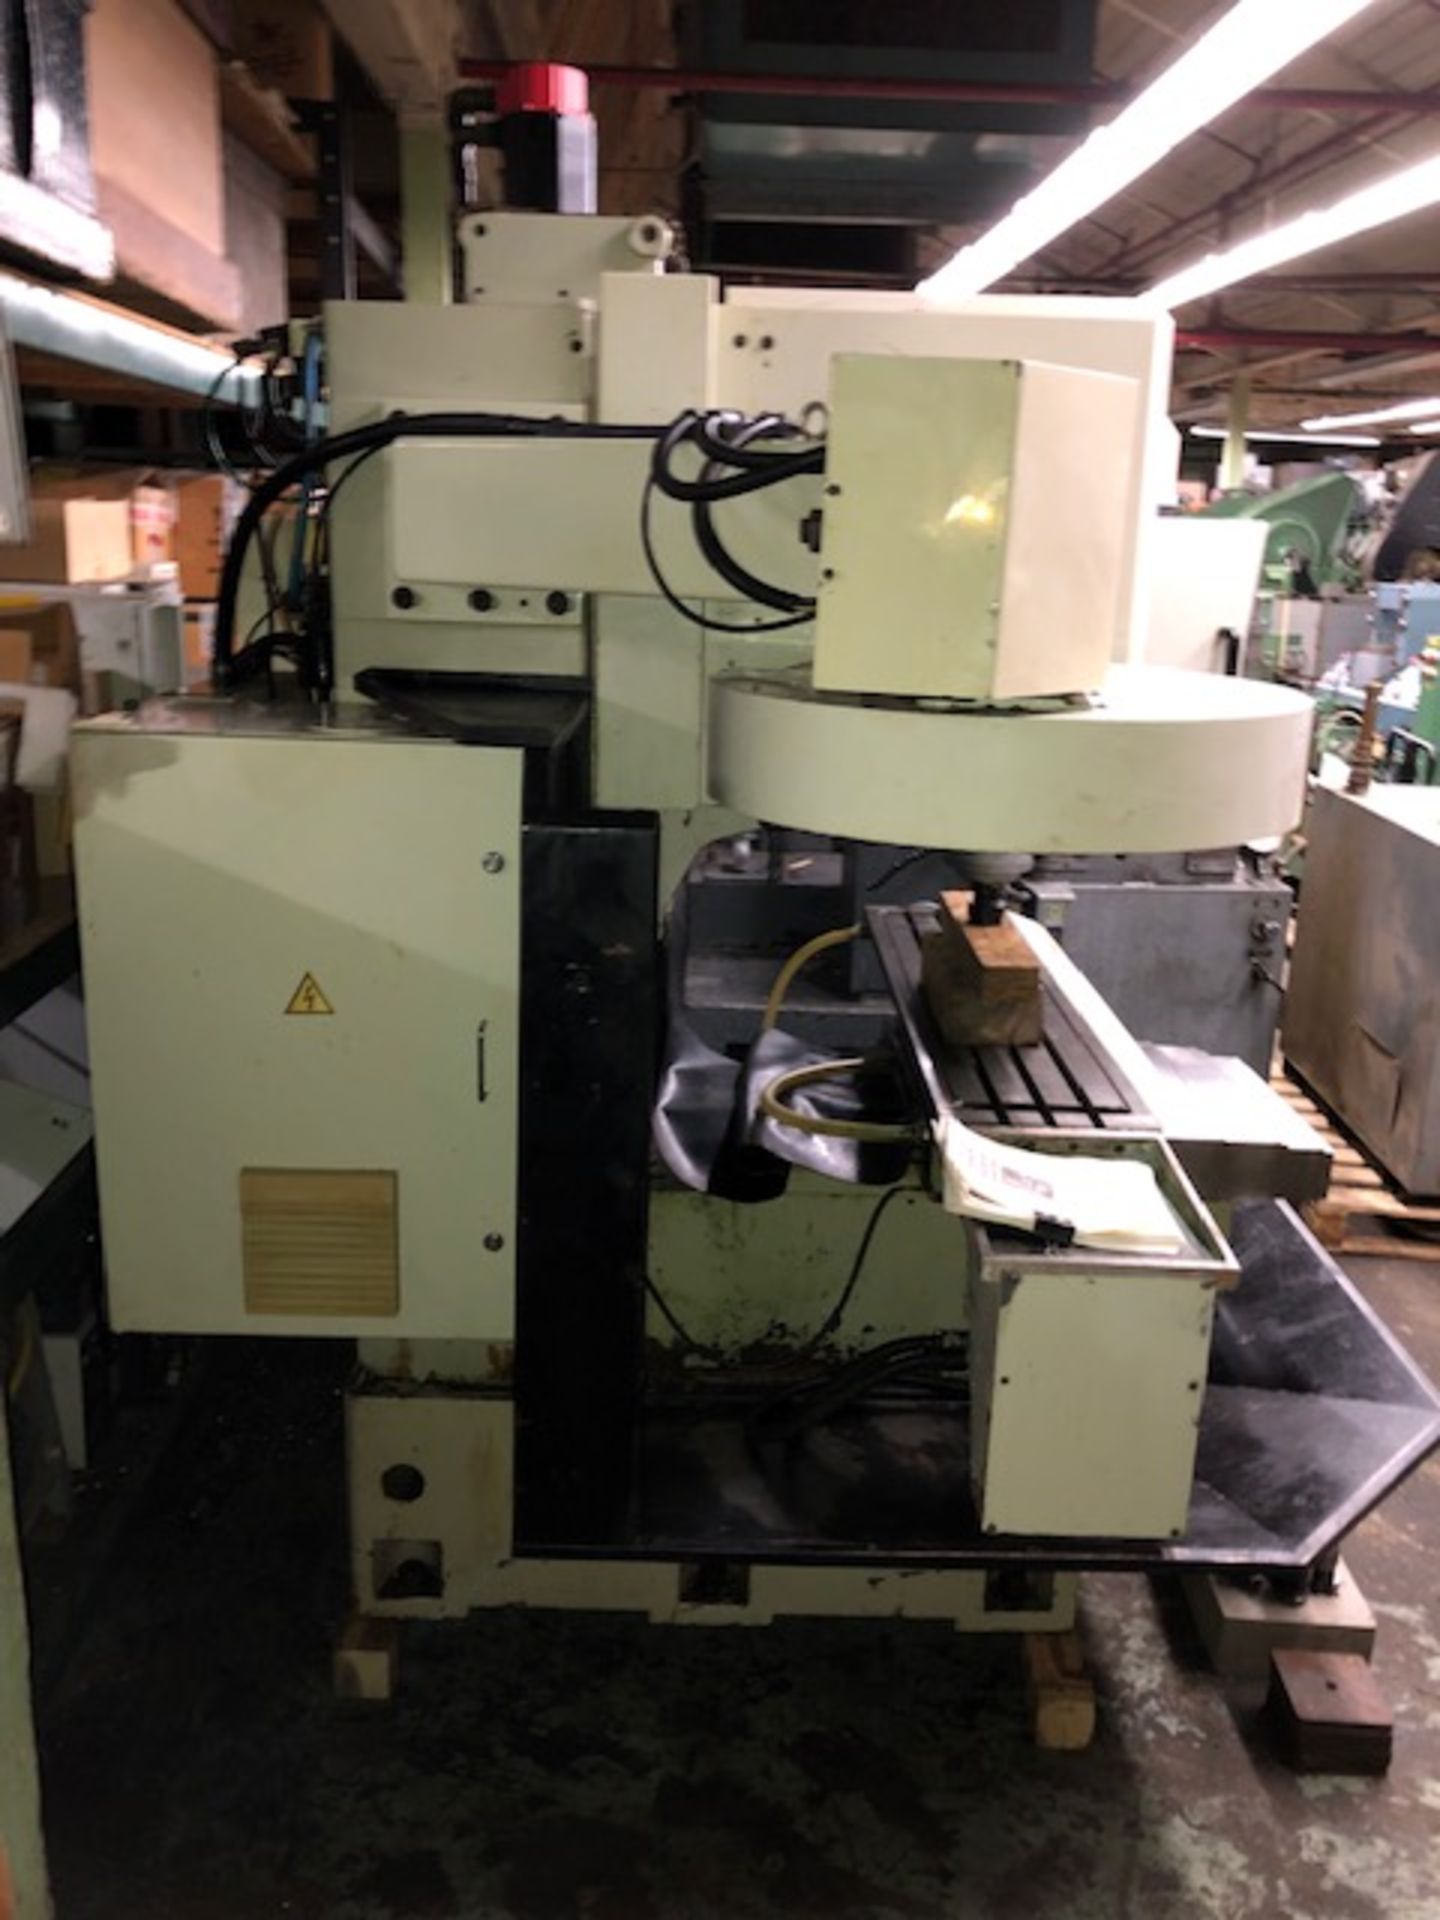 KENT USA MDL. TW-32-MV CNC BED MILL, FANUC 3-AXIS O-MD CONTROL - Image 16 of 30